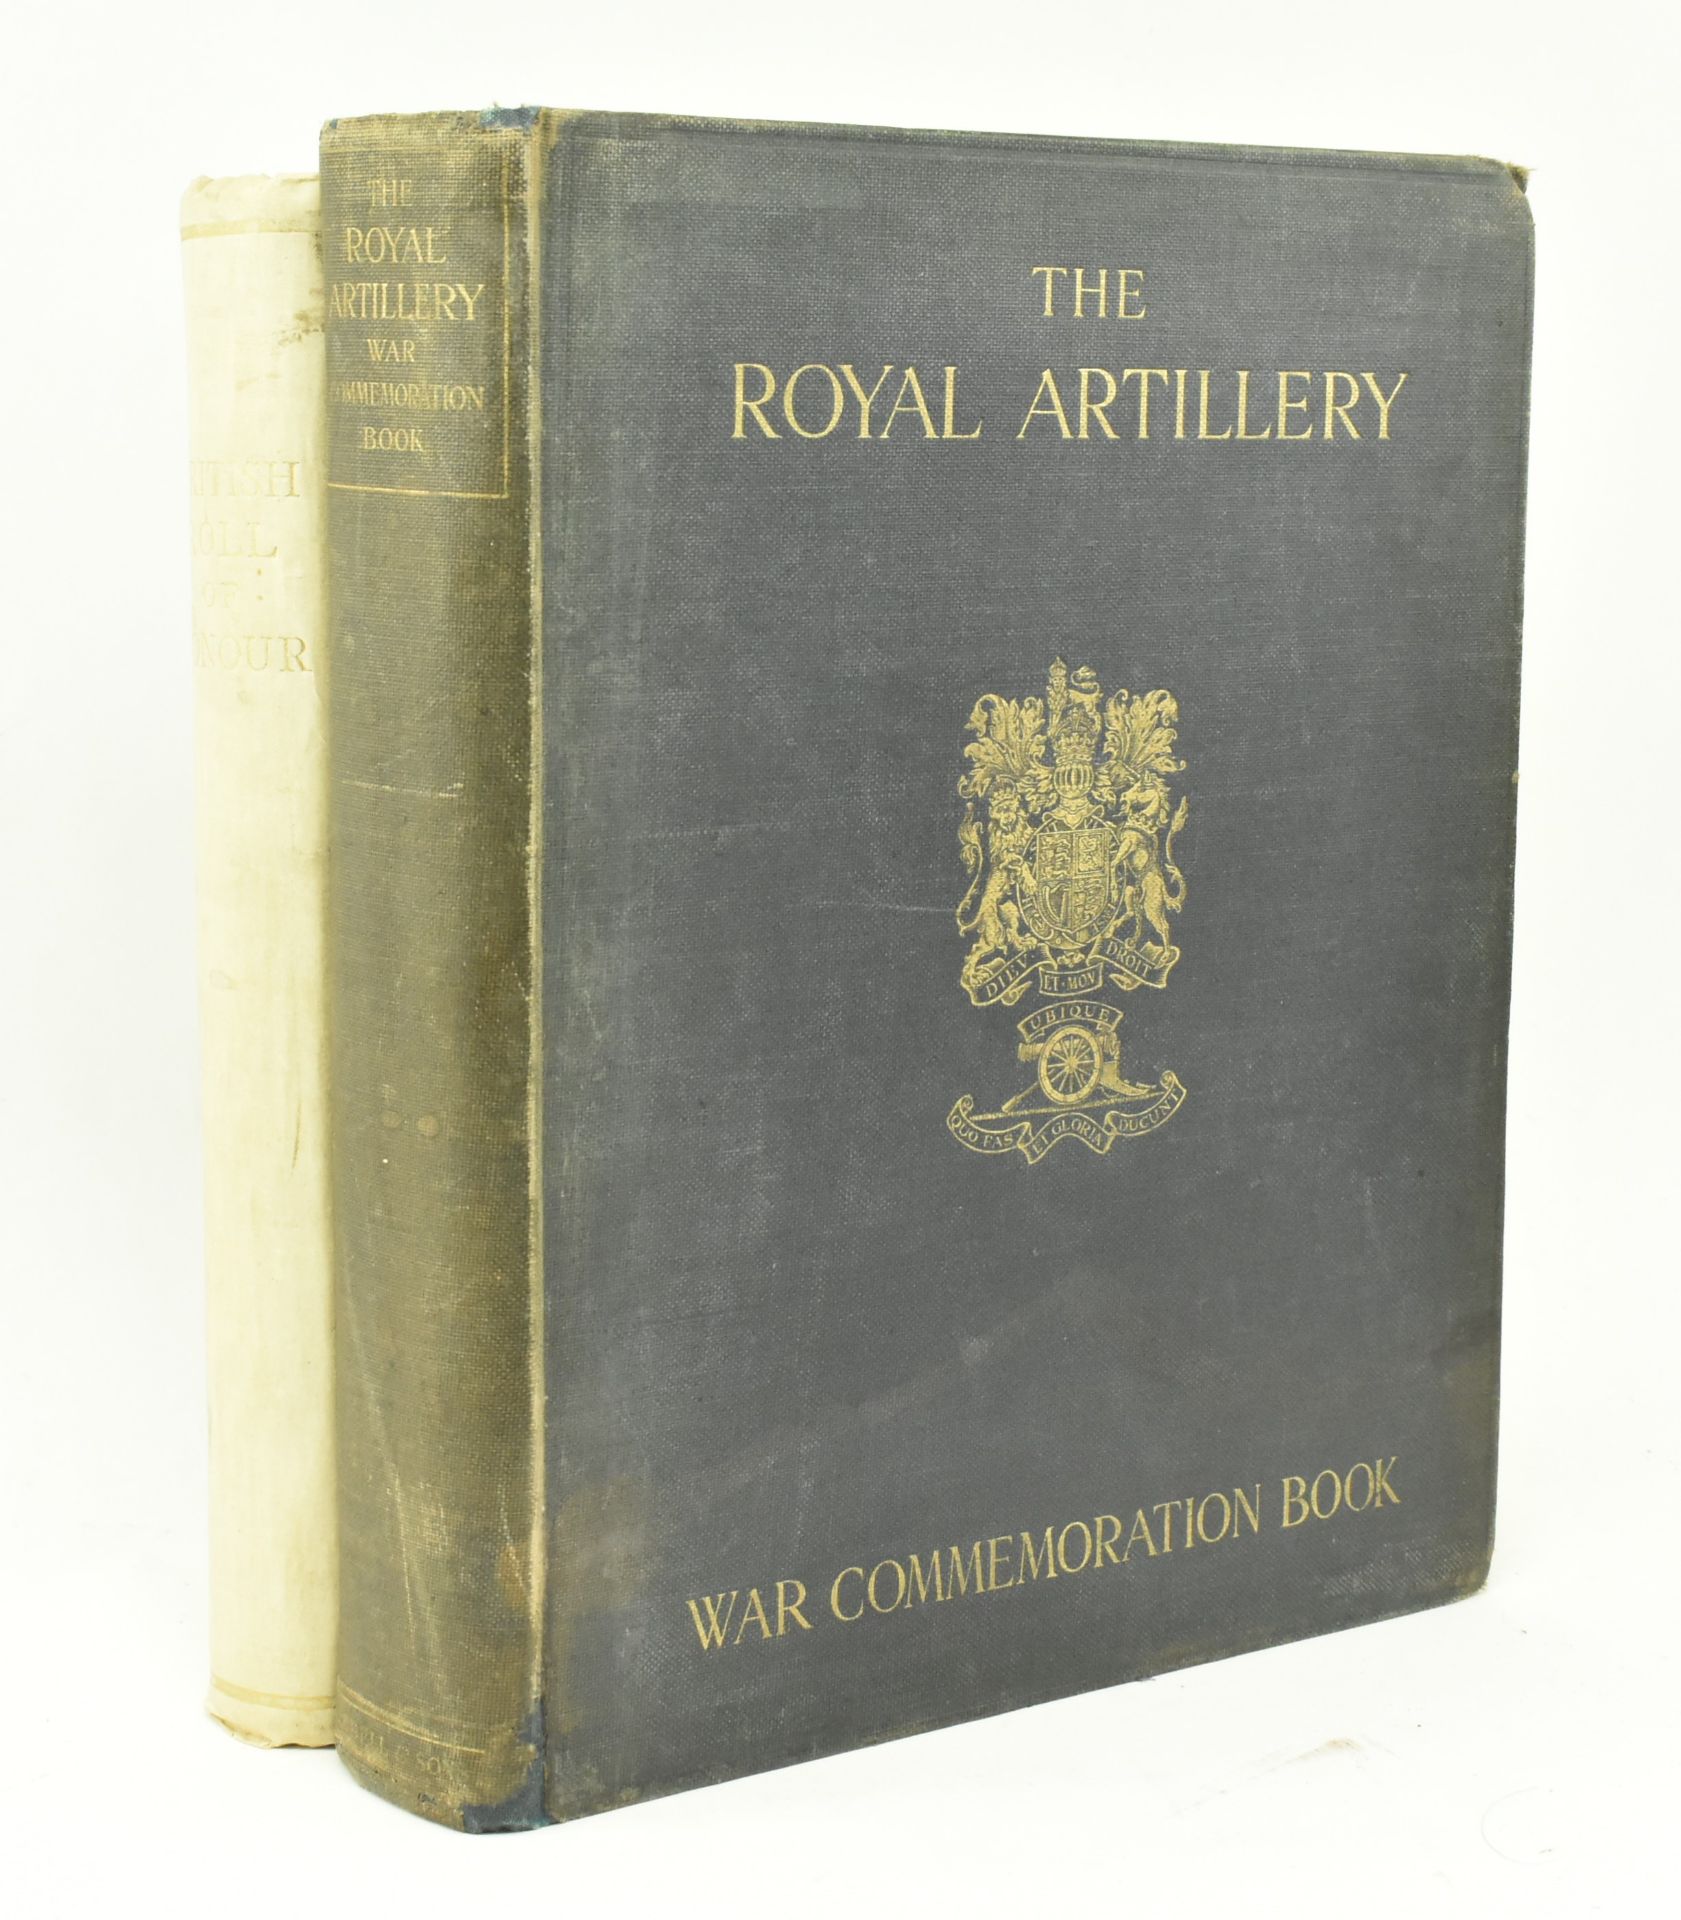 1920 THE ROYAL ARTILLERY WAR COMMEMORATION BOOK & ANOTHER